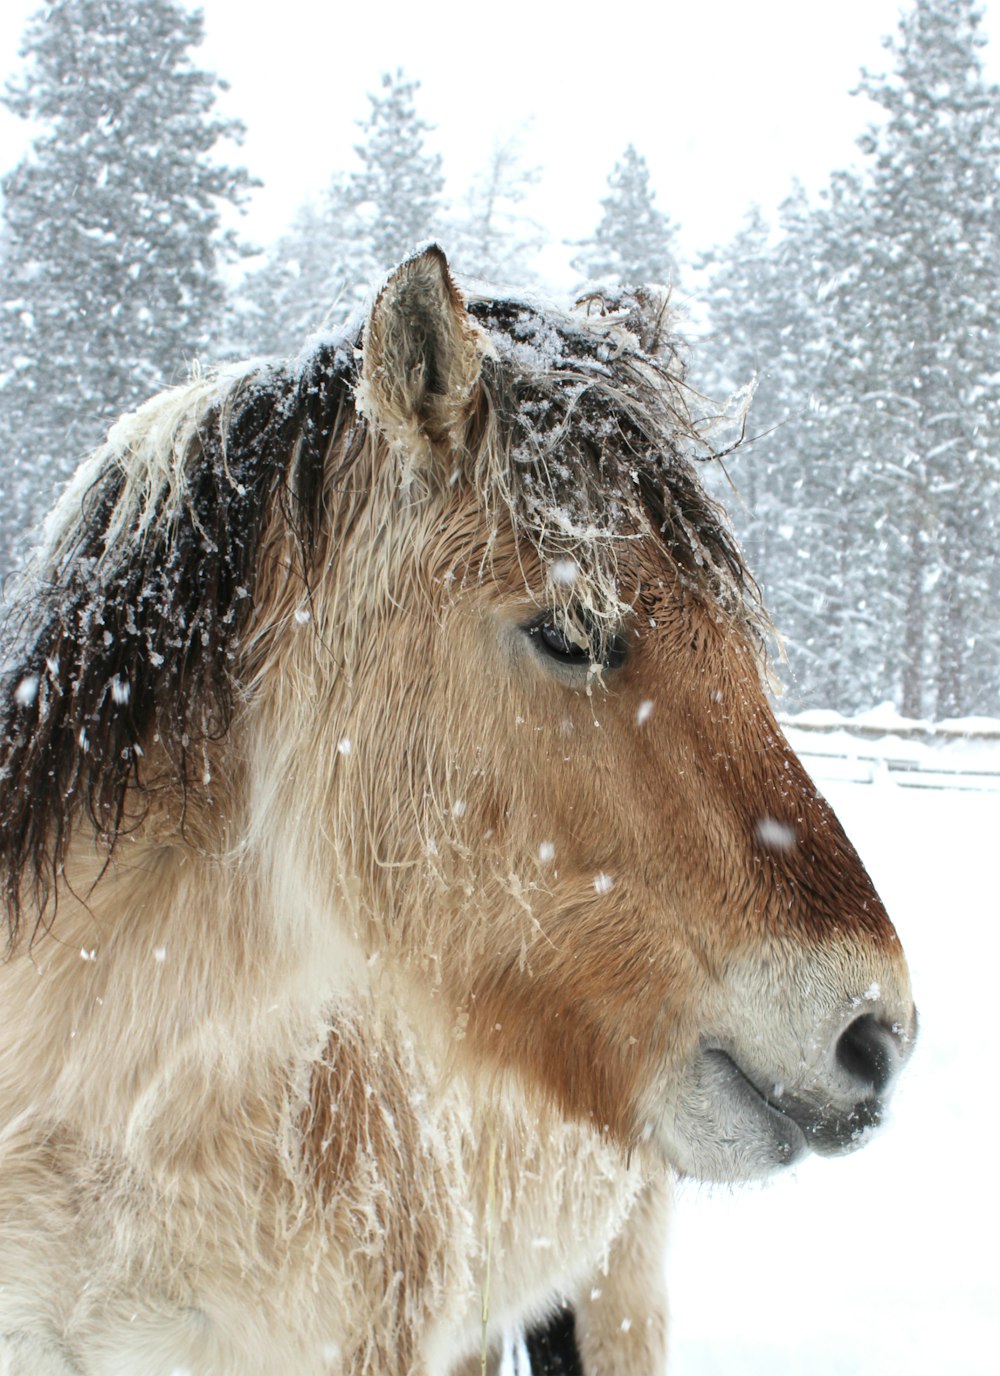 a horse standing in the snow with trees in the background